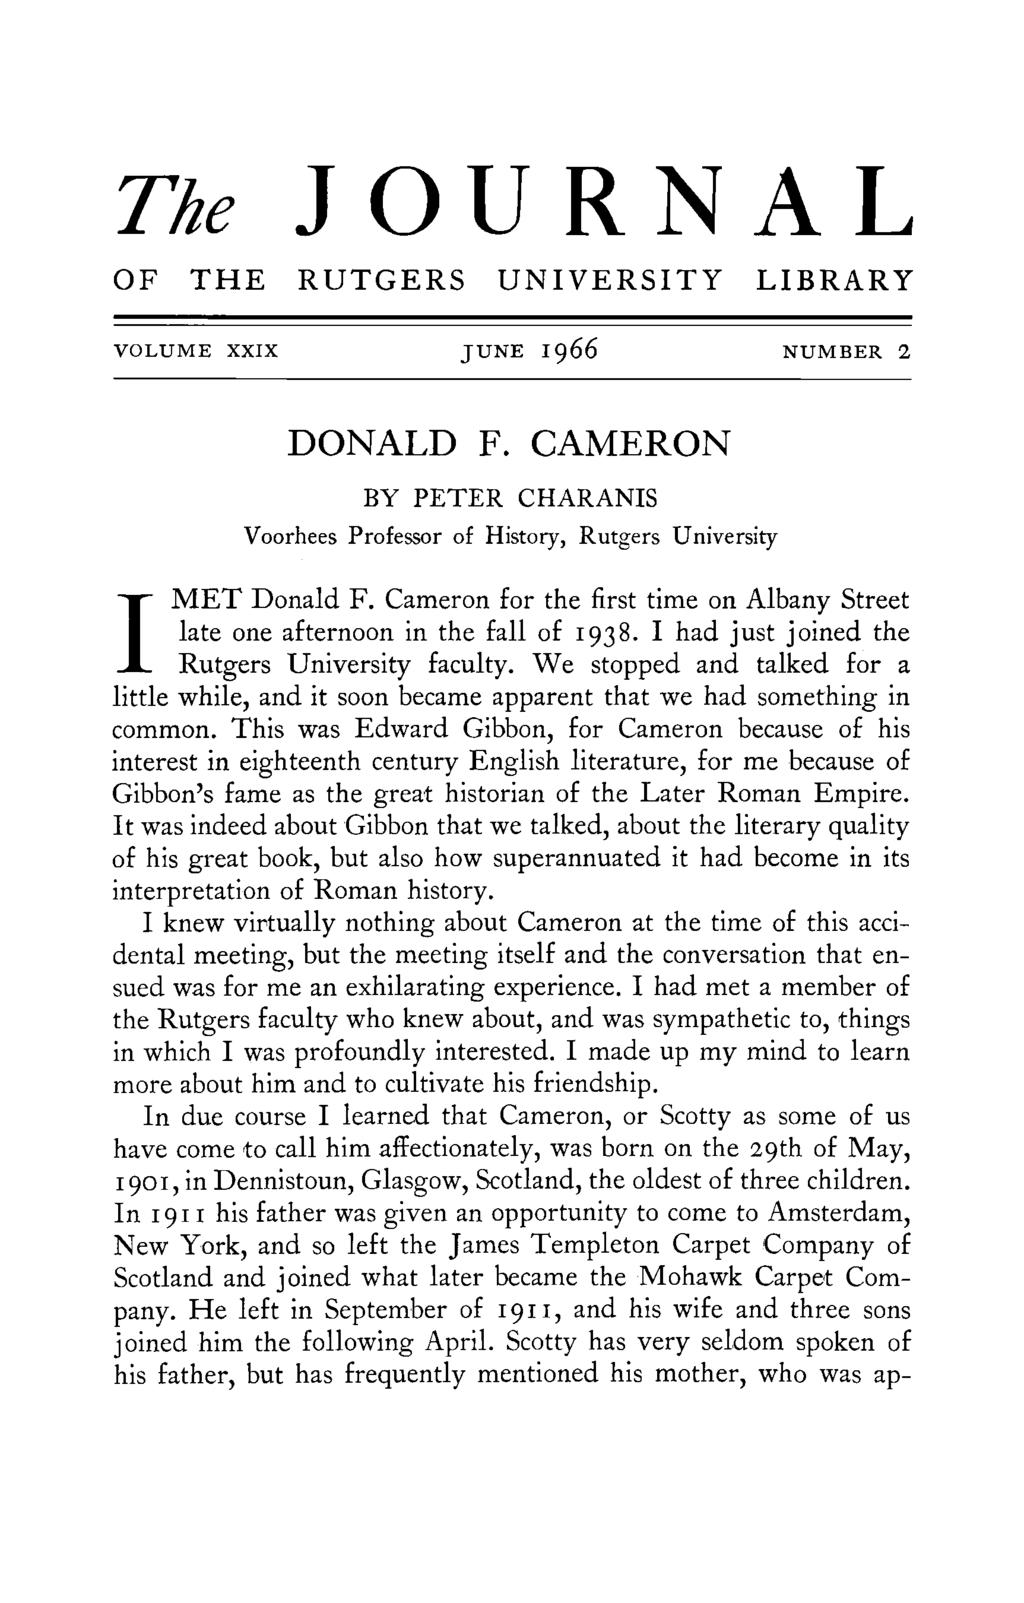 The JOURNAL OF THE RUTGERS UNIVERSITY LIBRARY VOLUME XXIX JUNE 1966 NUMBER 2 DONALD F. CAMERON BY PETER CHARANIS Voorhees Professor of History, Rutgers University IM ET Donald F.